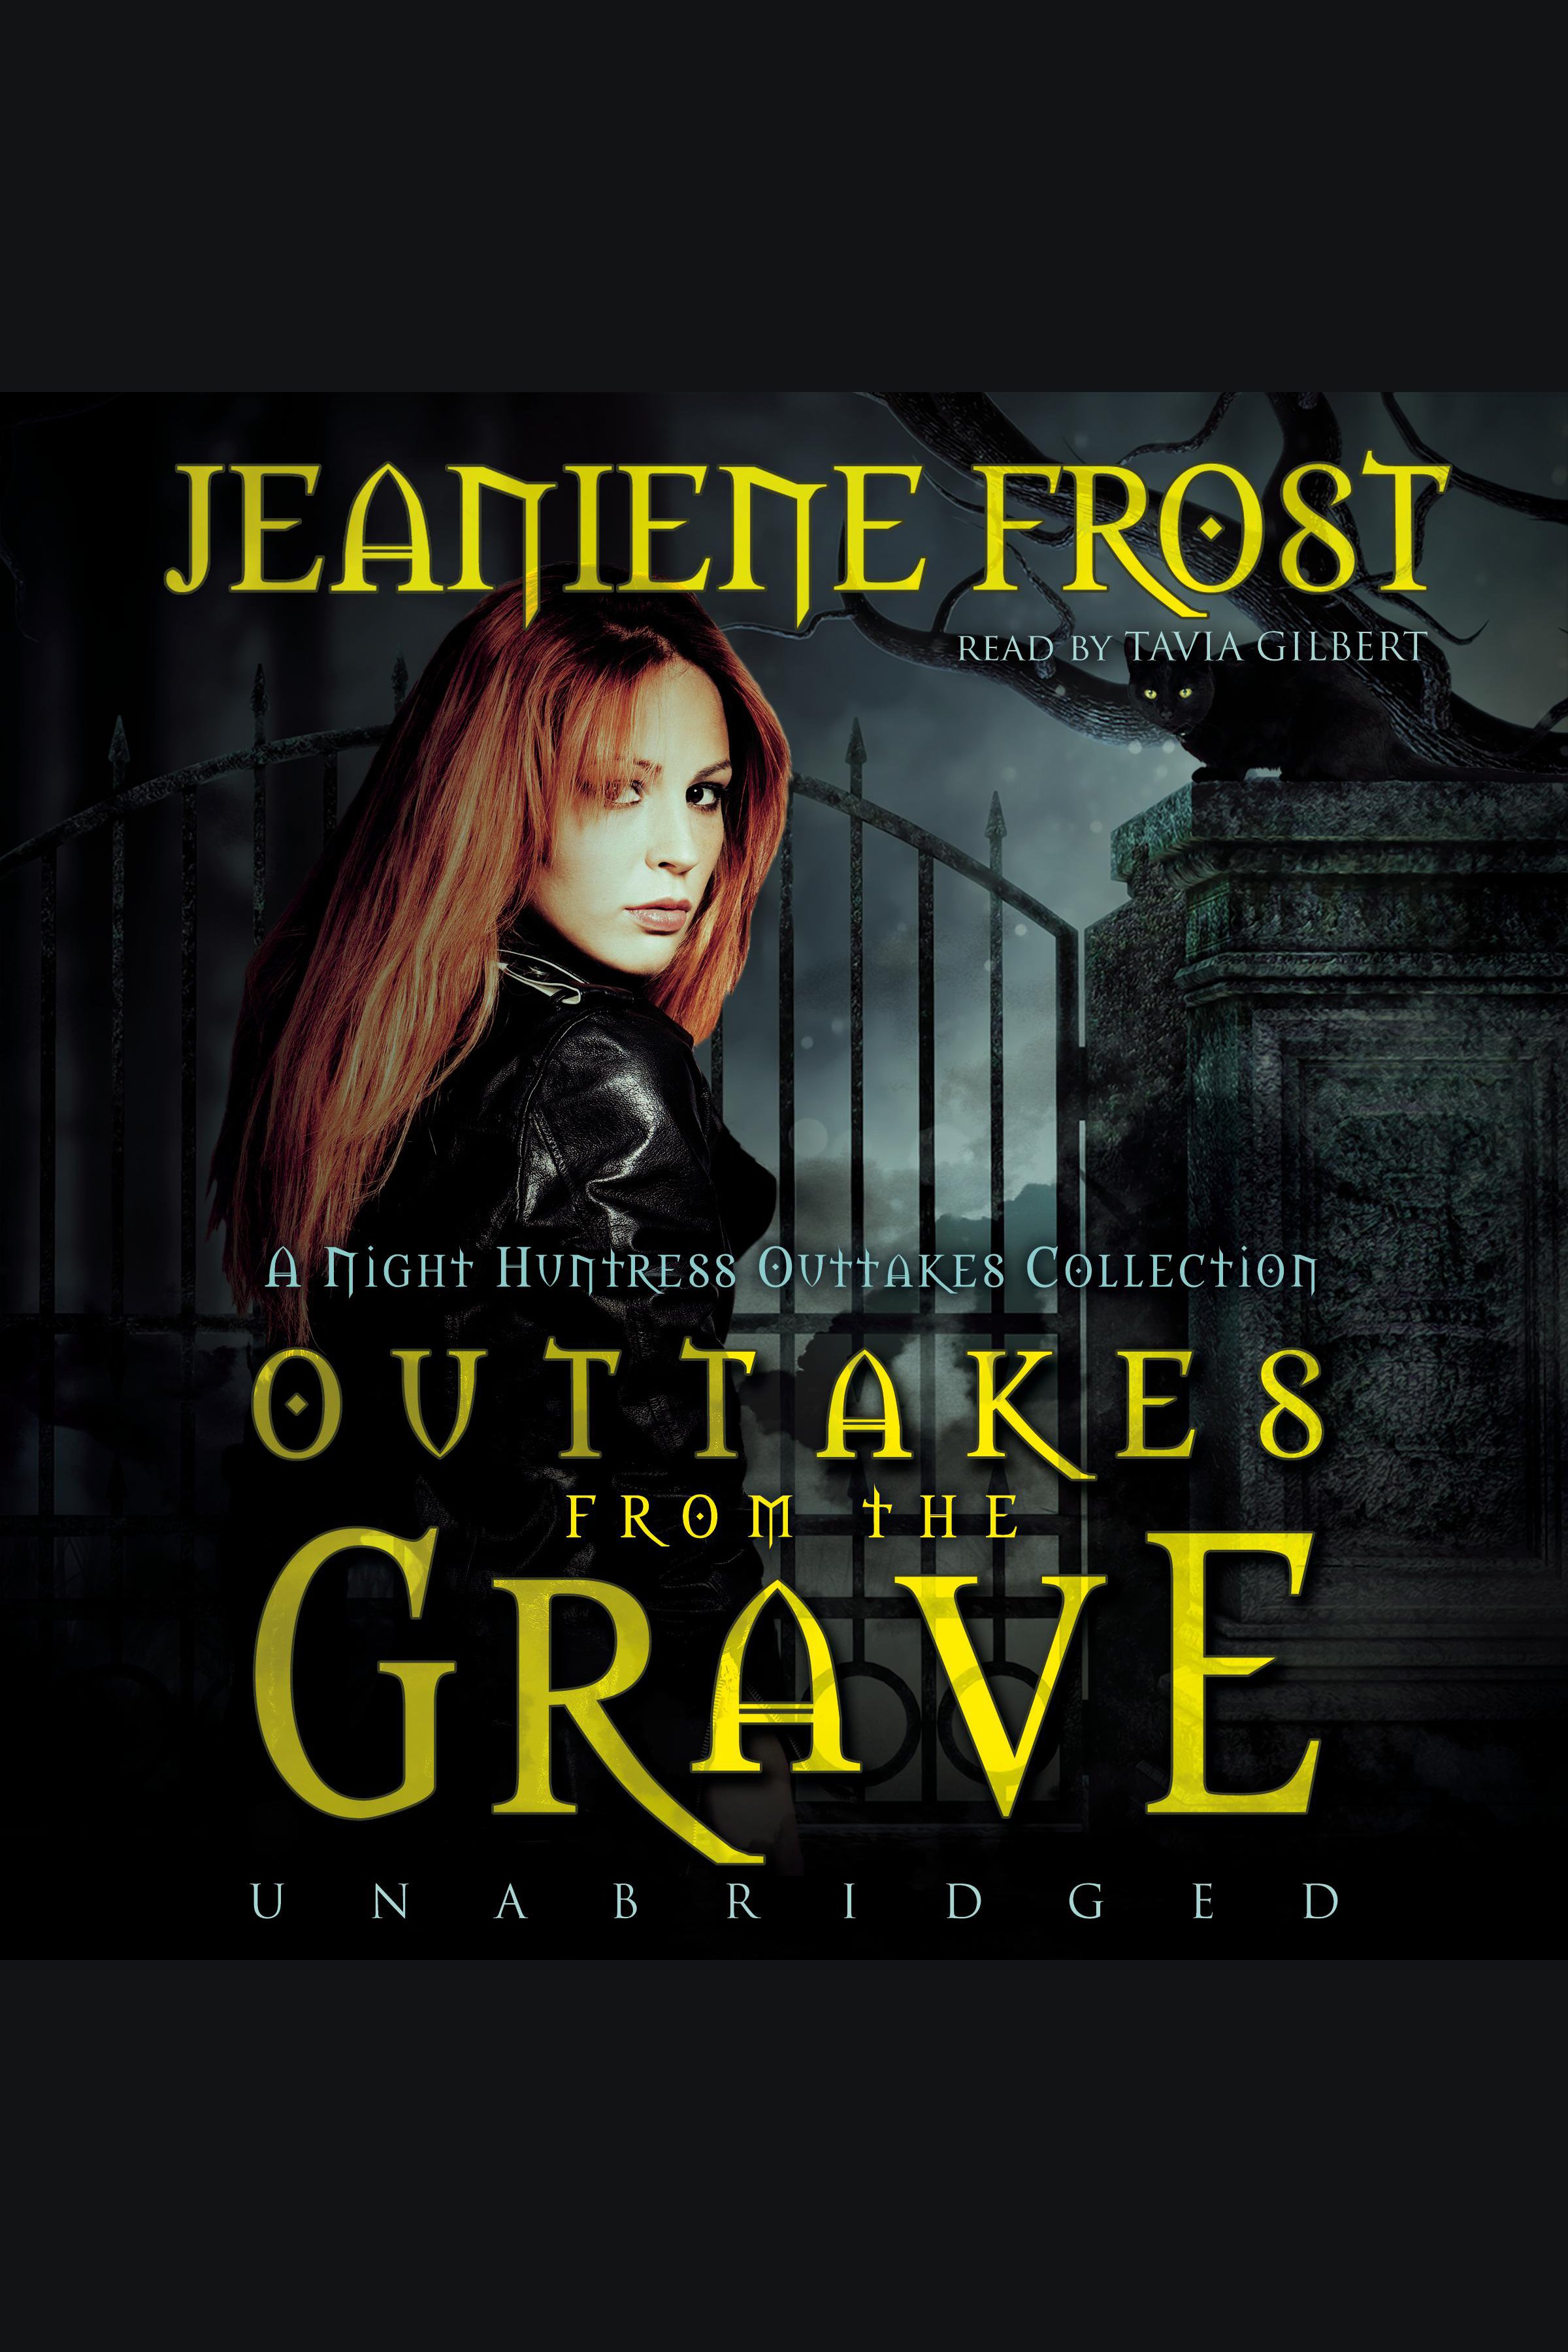 Image de couverture de Outtakes from the Grave [electronic resource] : A Night Huntress Outtakes Collection